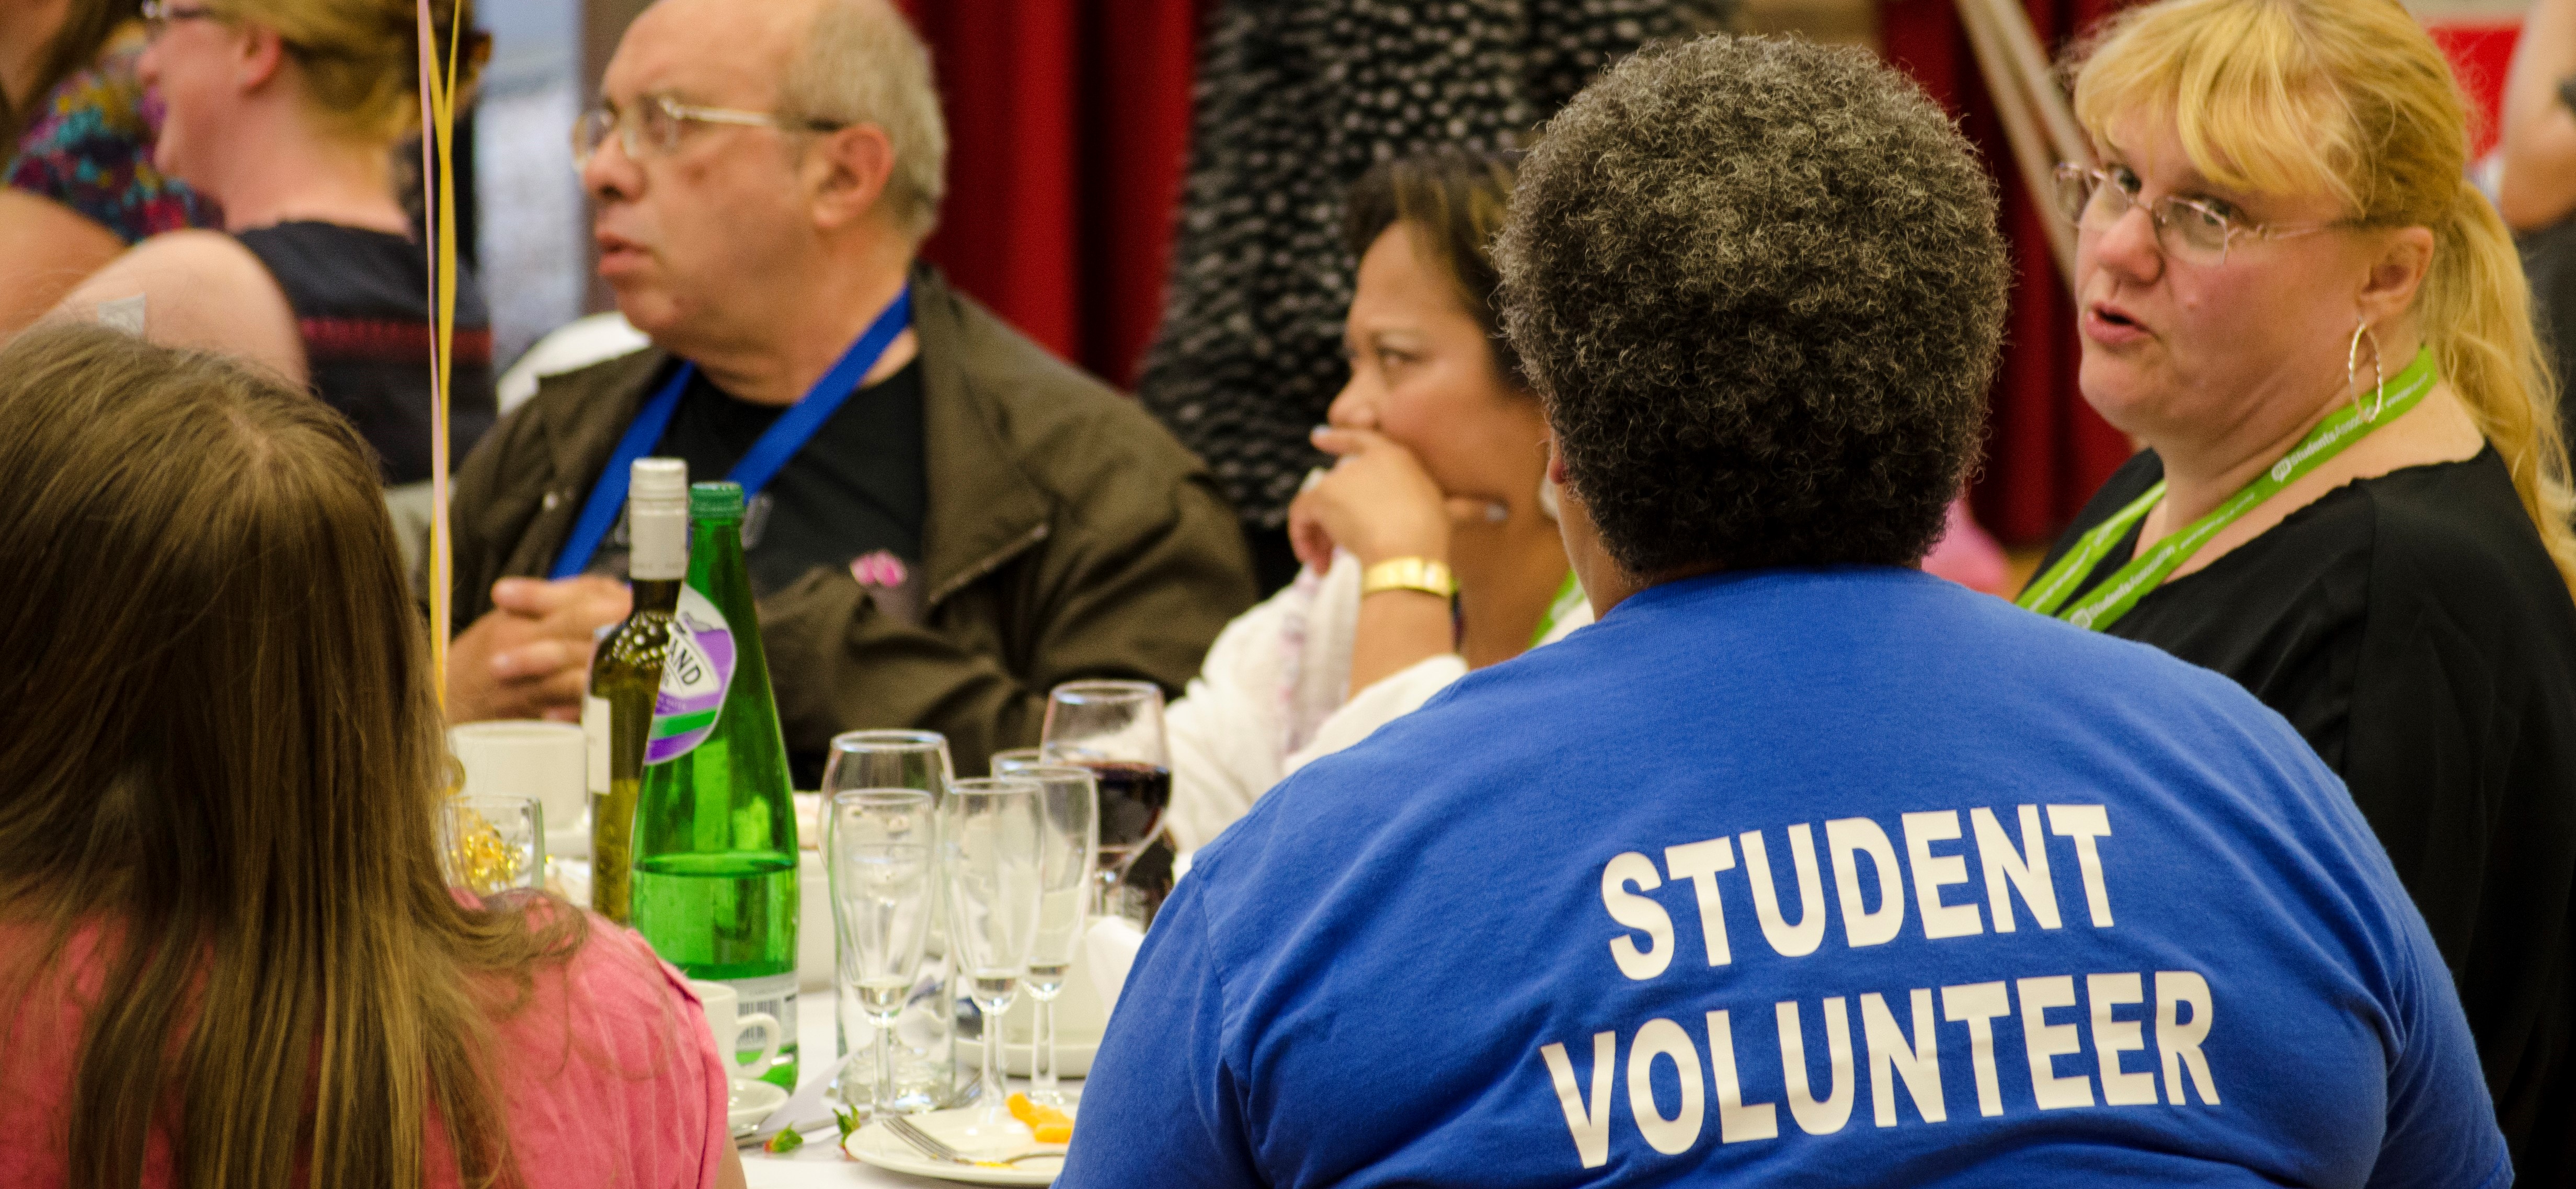 A group of 5 students sit around a table at a celebratory event. A lady with short grey and brown hair has her back to the camera in a t-shirt that reads 'student volunteer'.